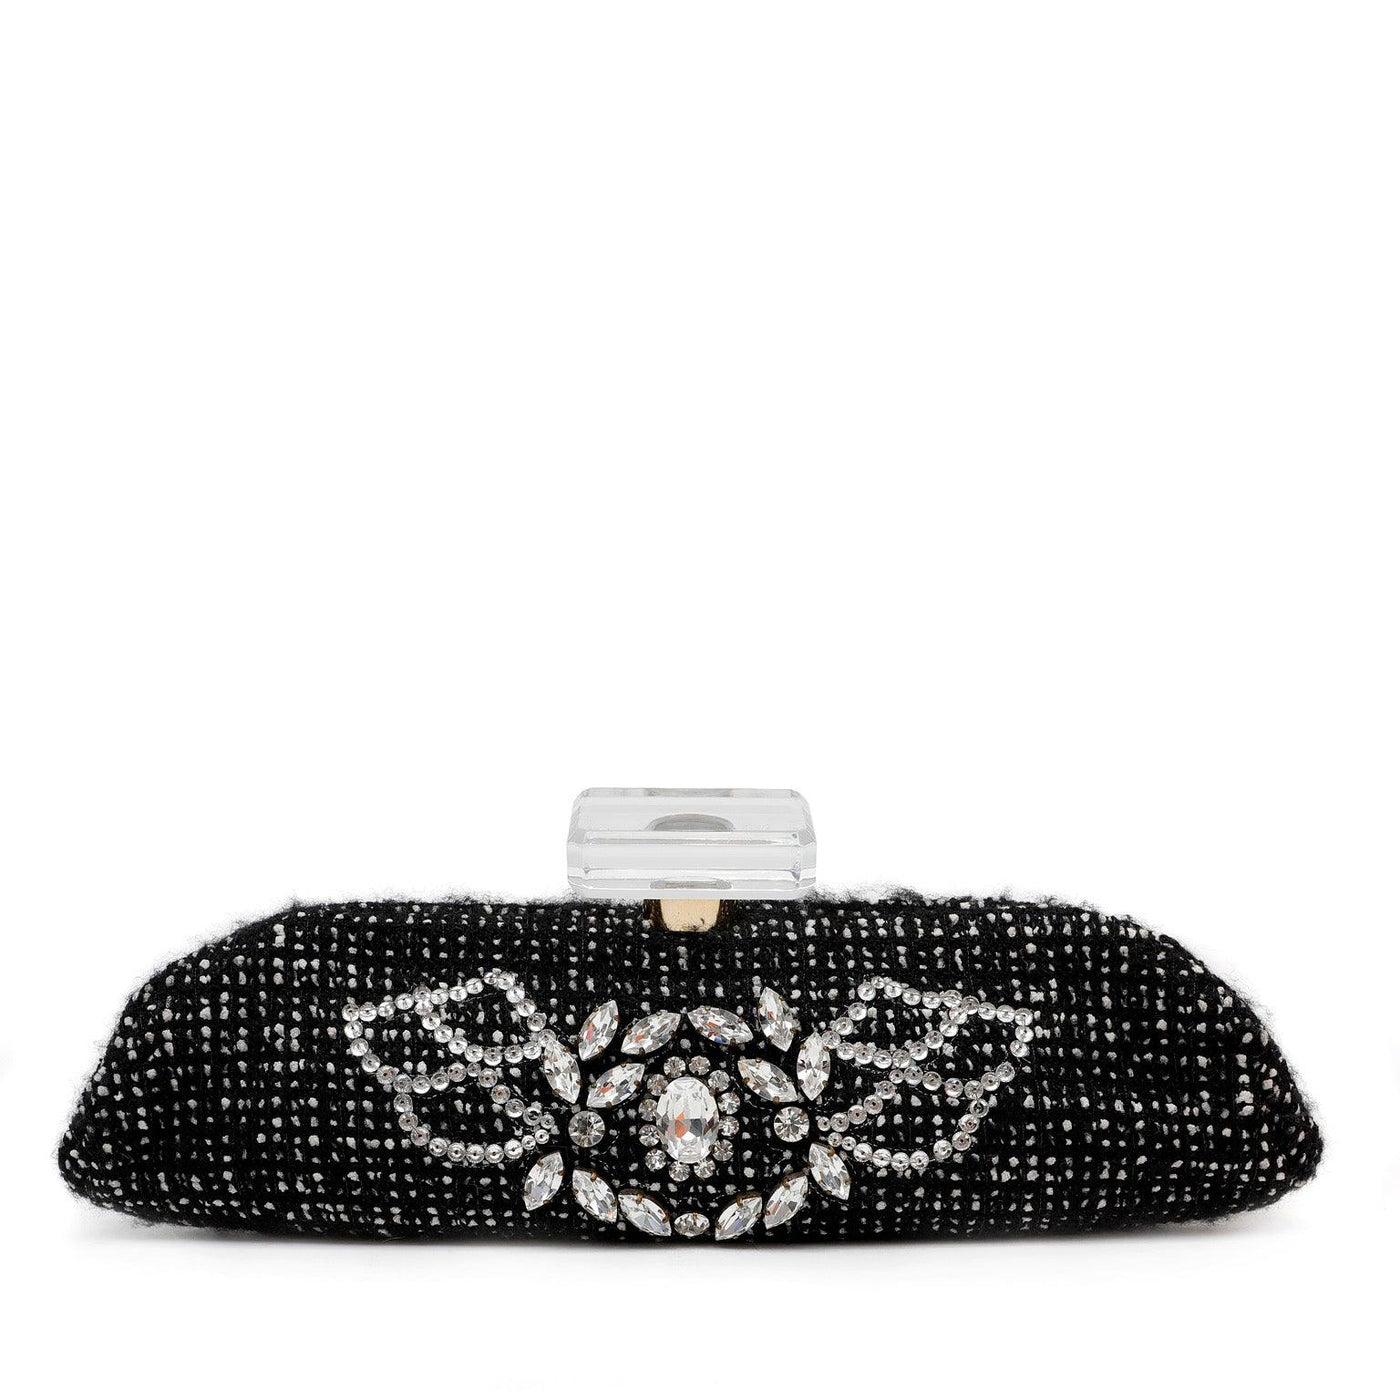 Chanel Black Tweed and Rhinestone Runway Clutch - Only Authentics